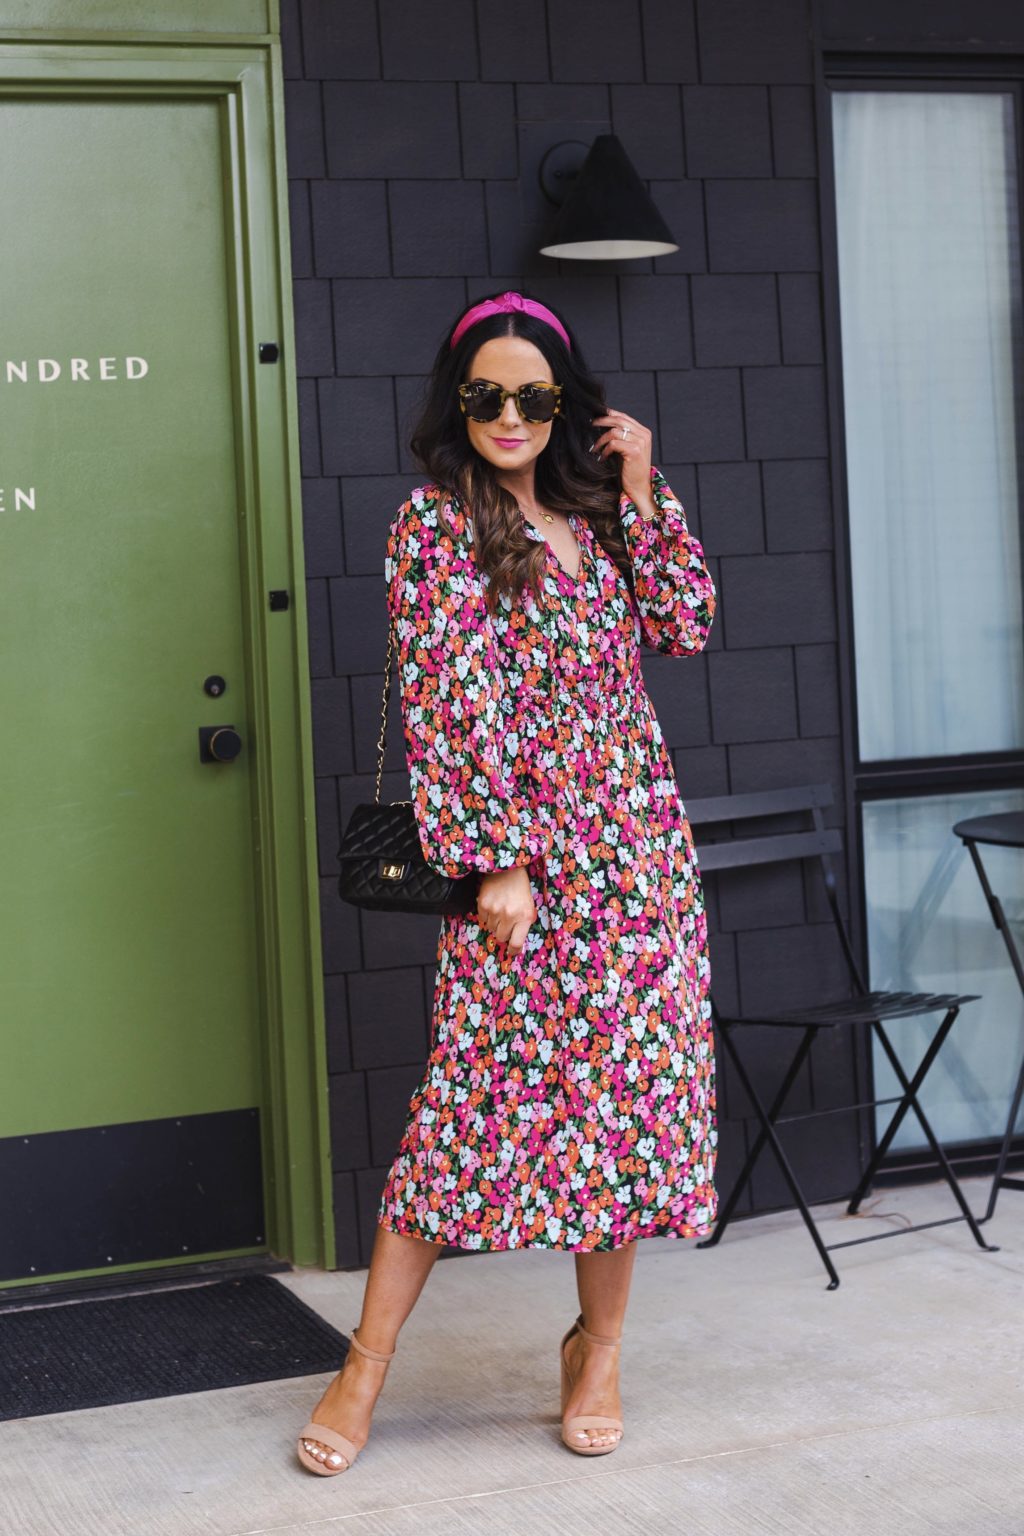 Perfect Spring Midi Dresses Under $40 - The Double Take Girls